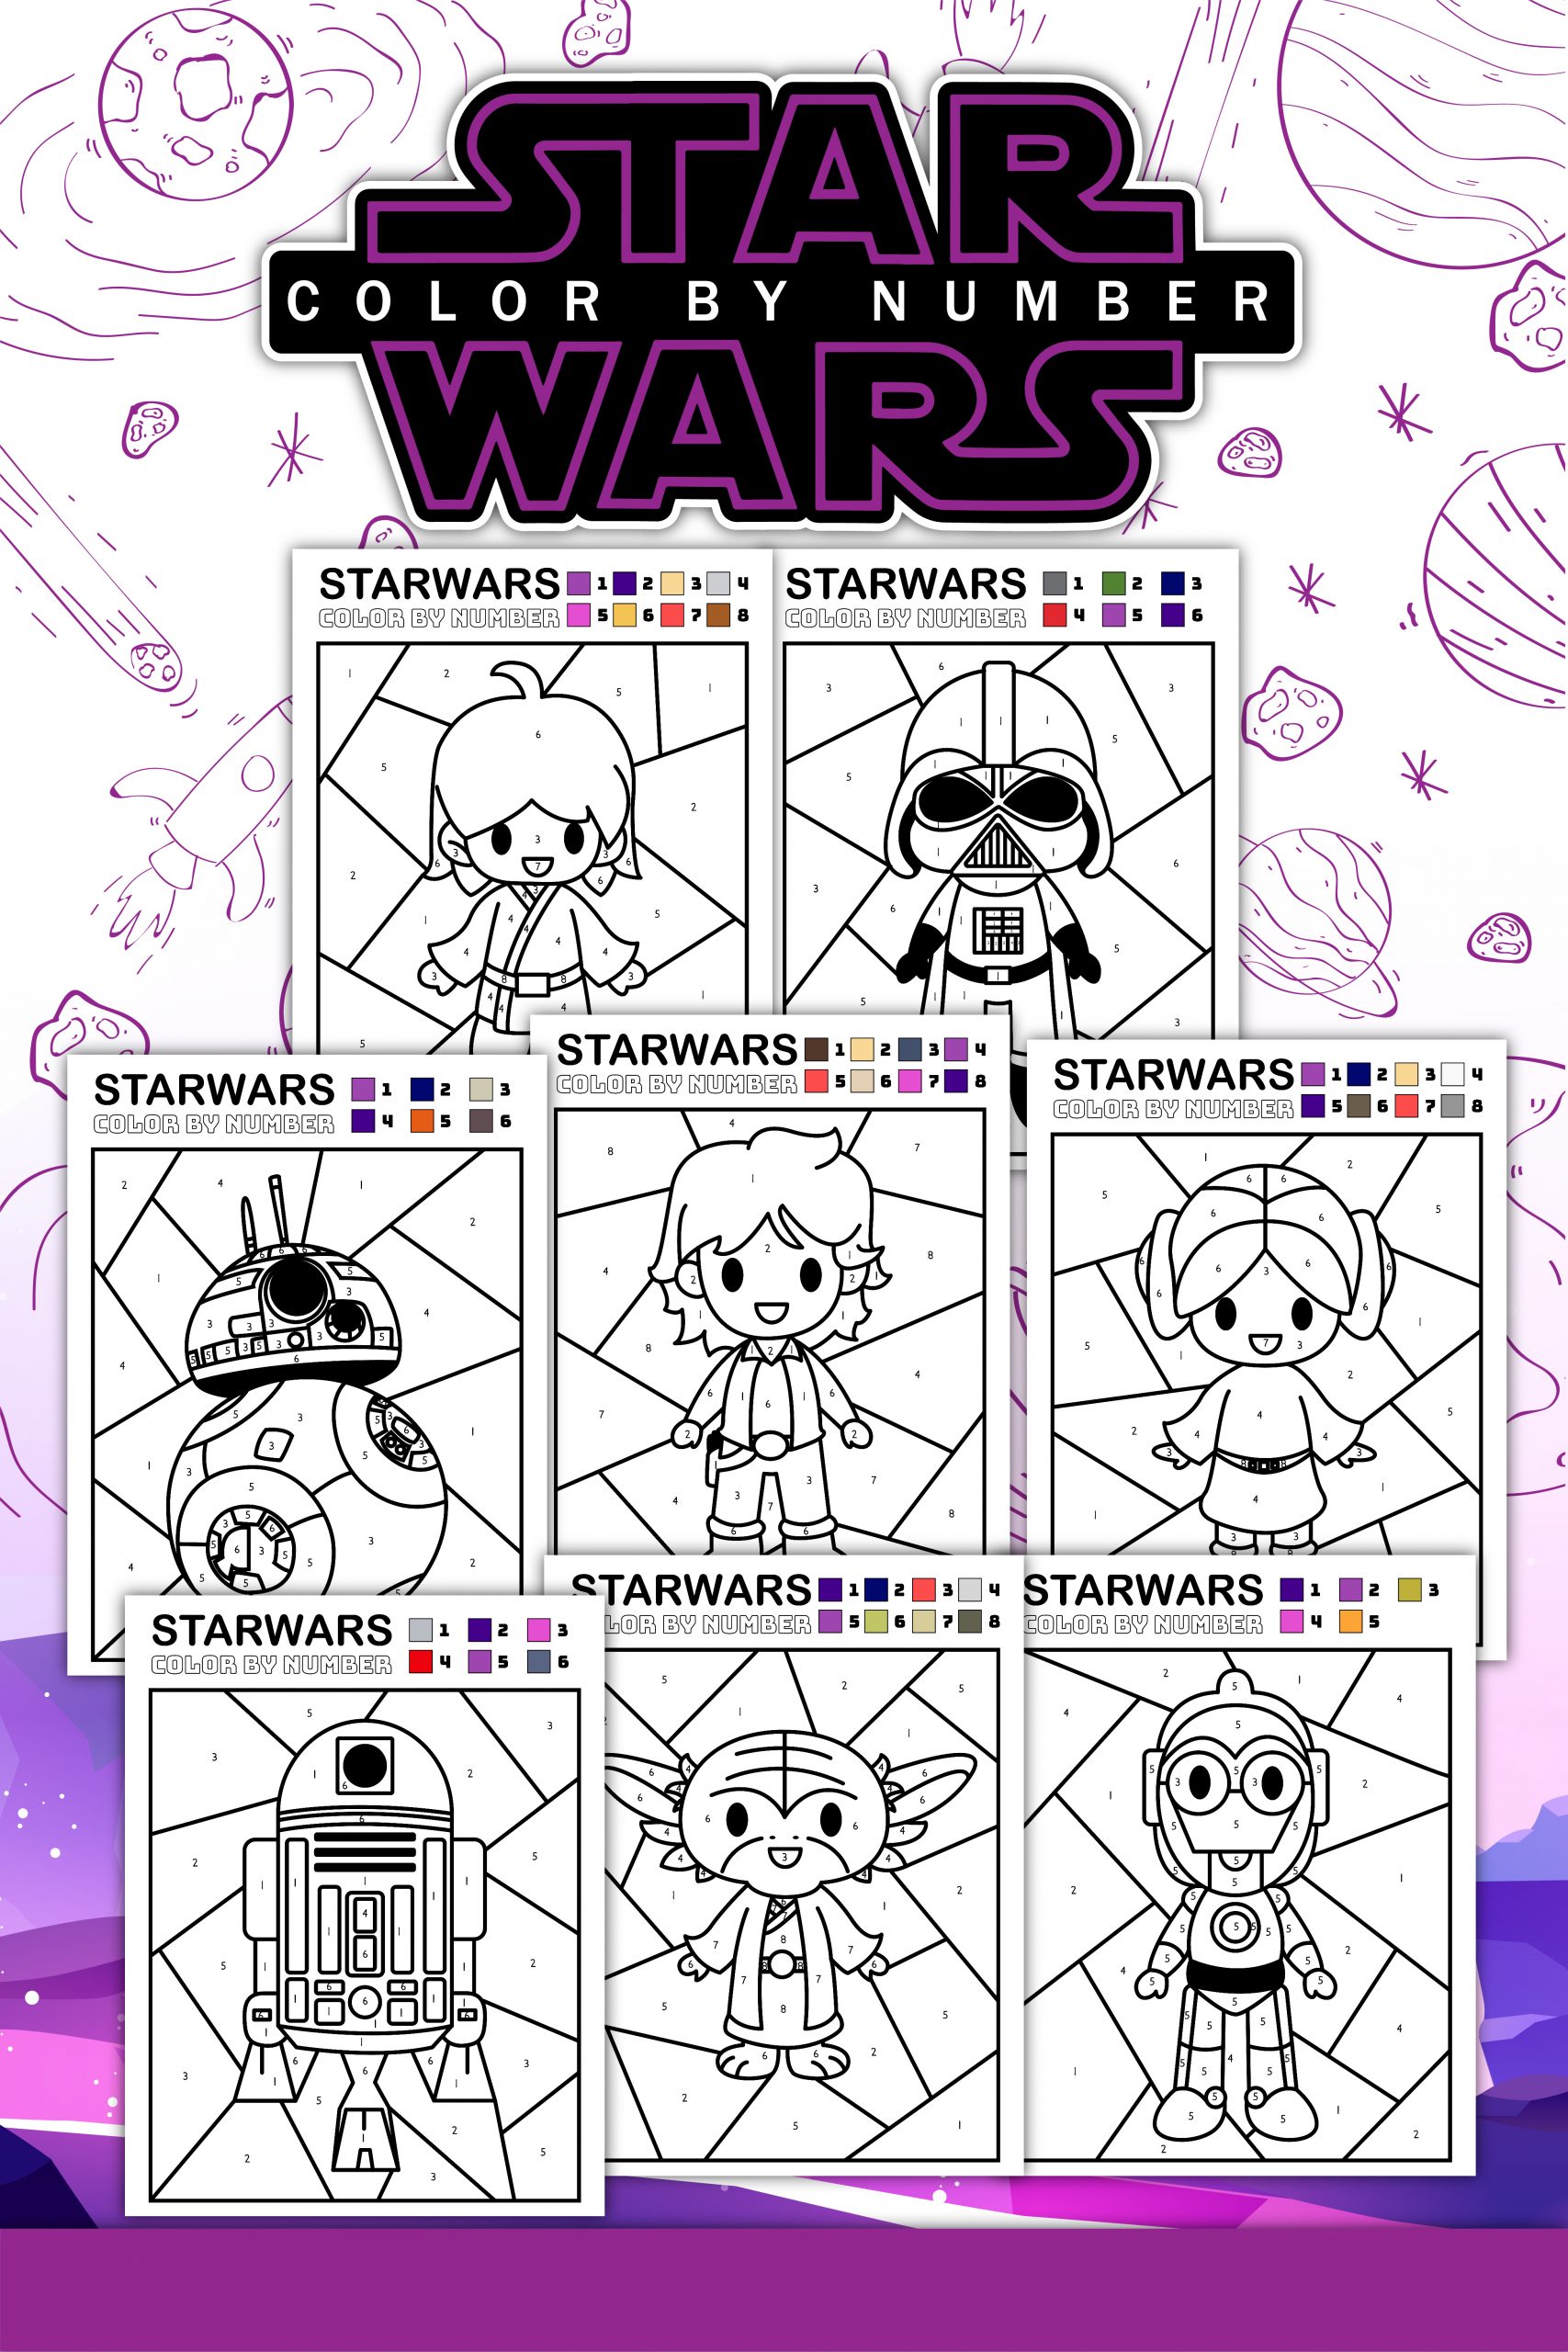 Star Wars Color by Numbers Pages (Free Printable)